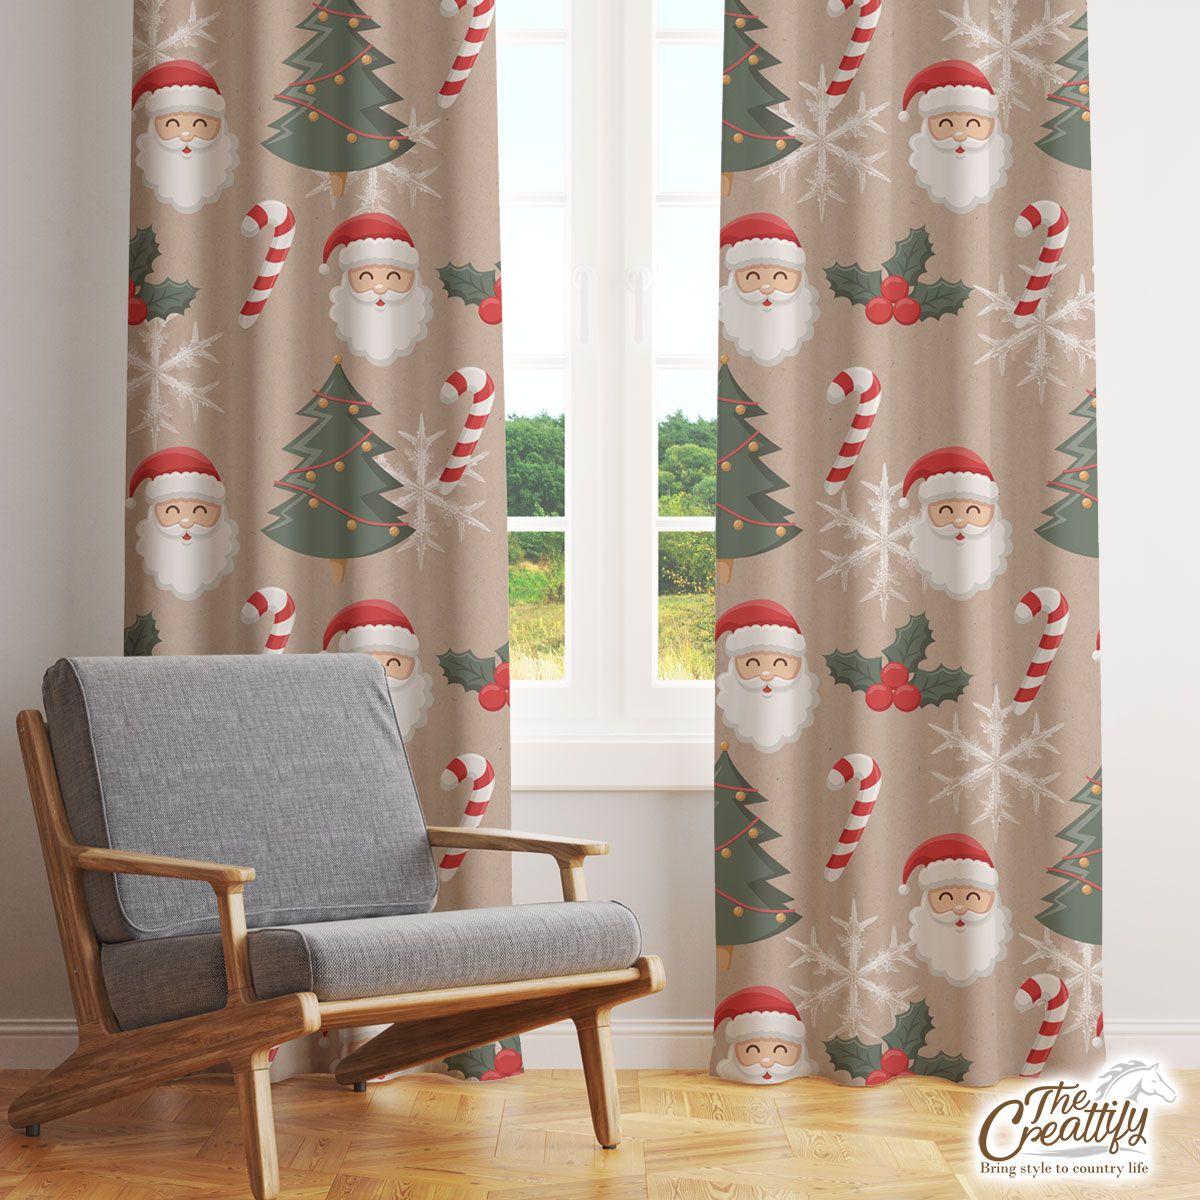 Santa Clause, Christmas Tree, Candy Cane, Holly Leaf On Snowflake Background Window Curtain